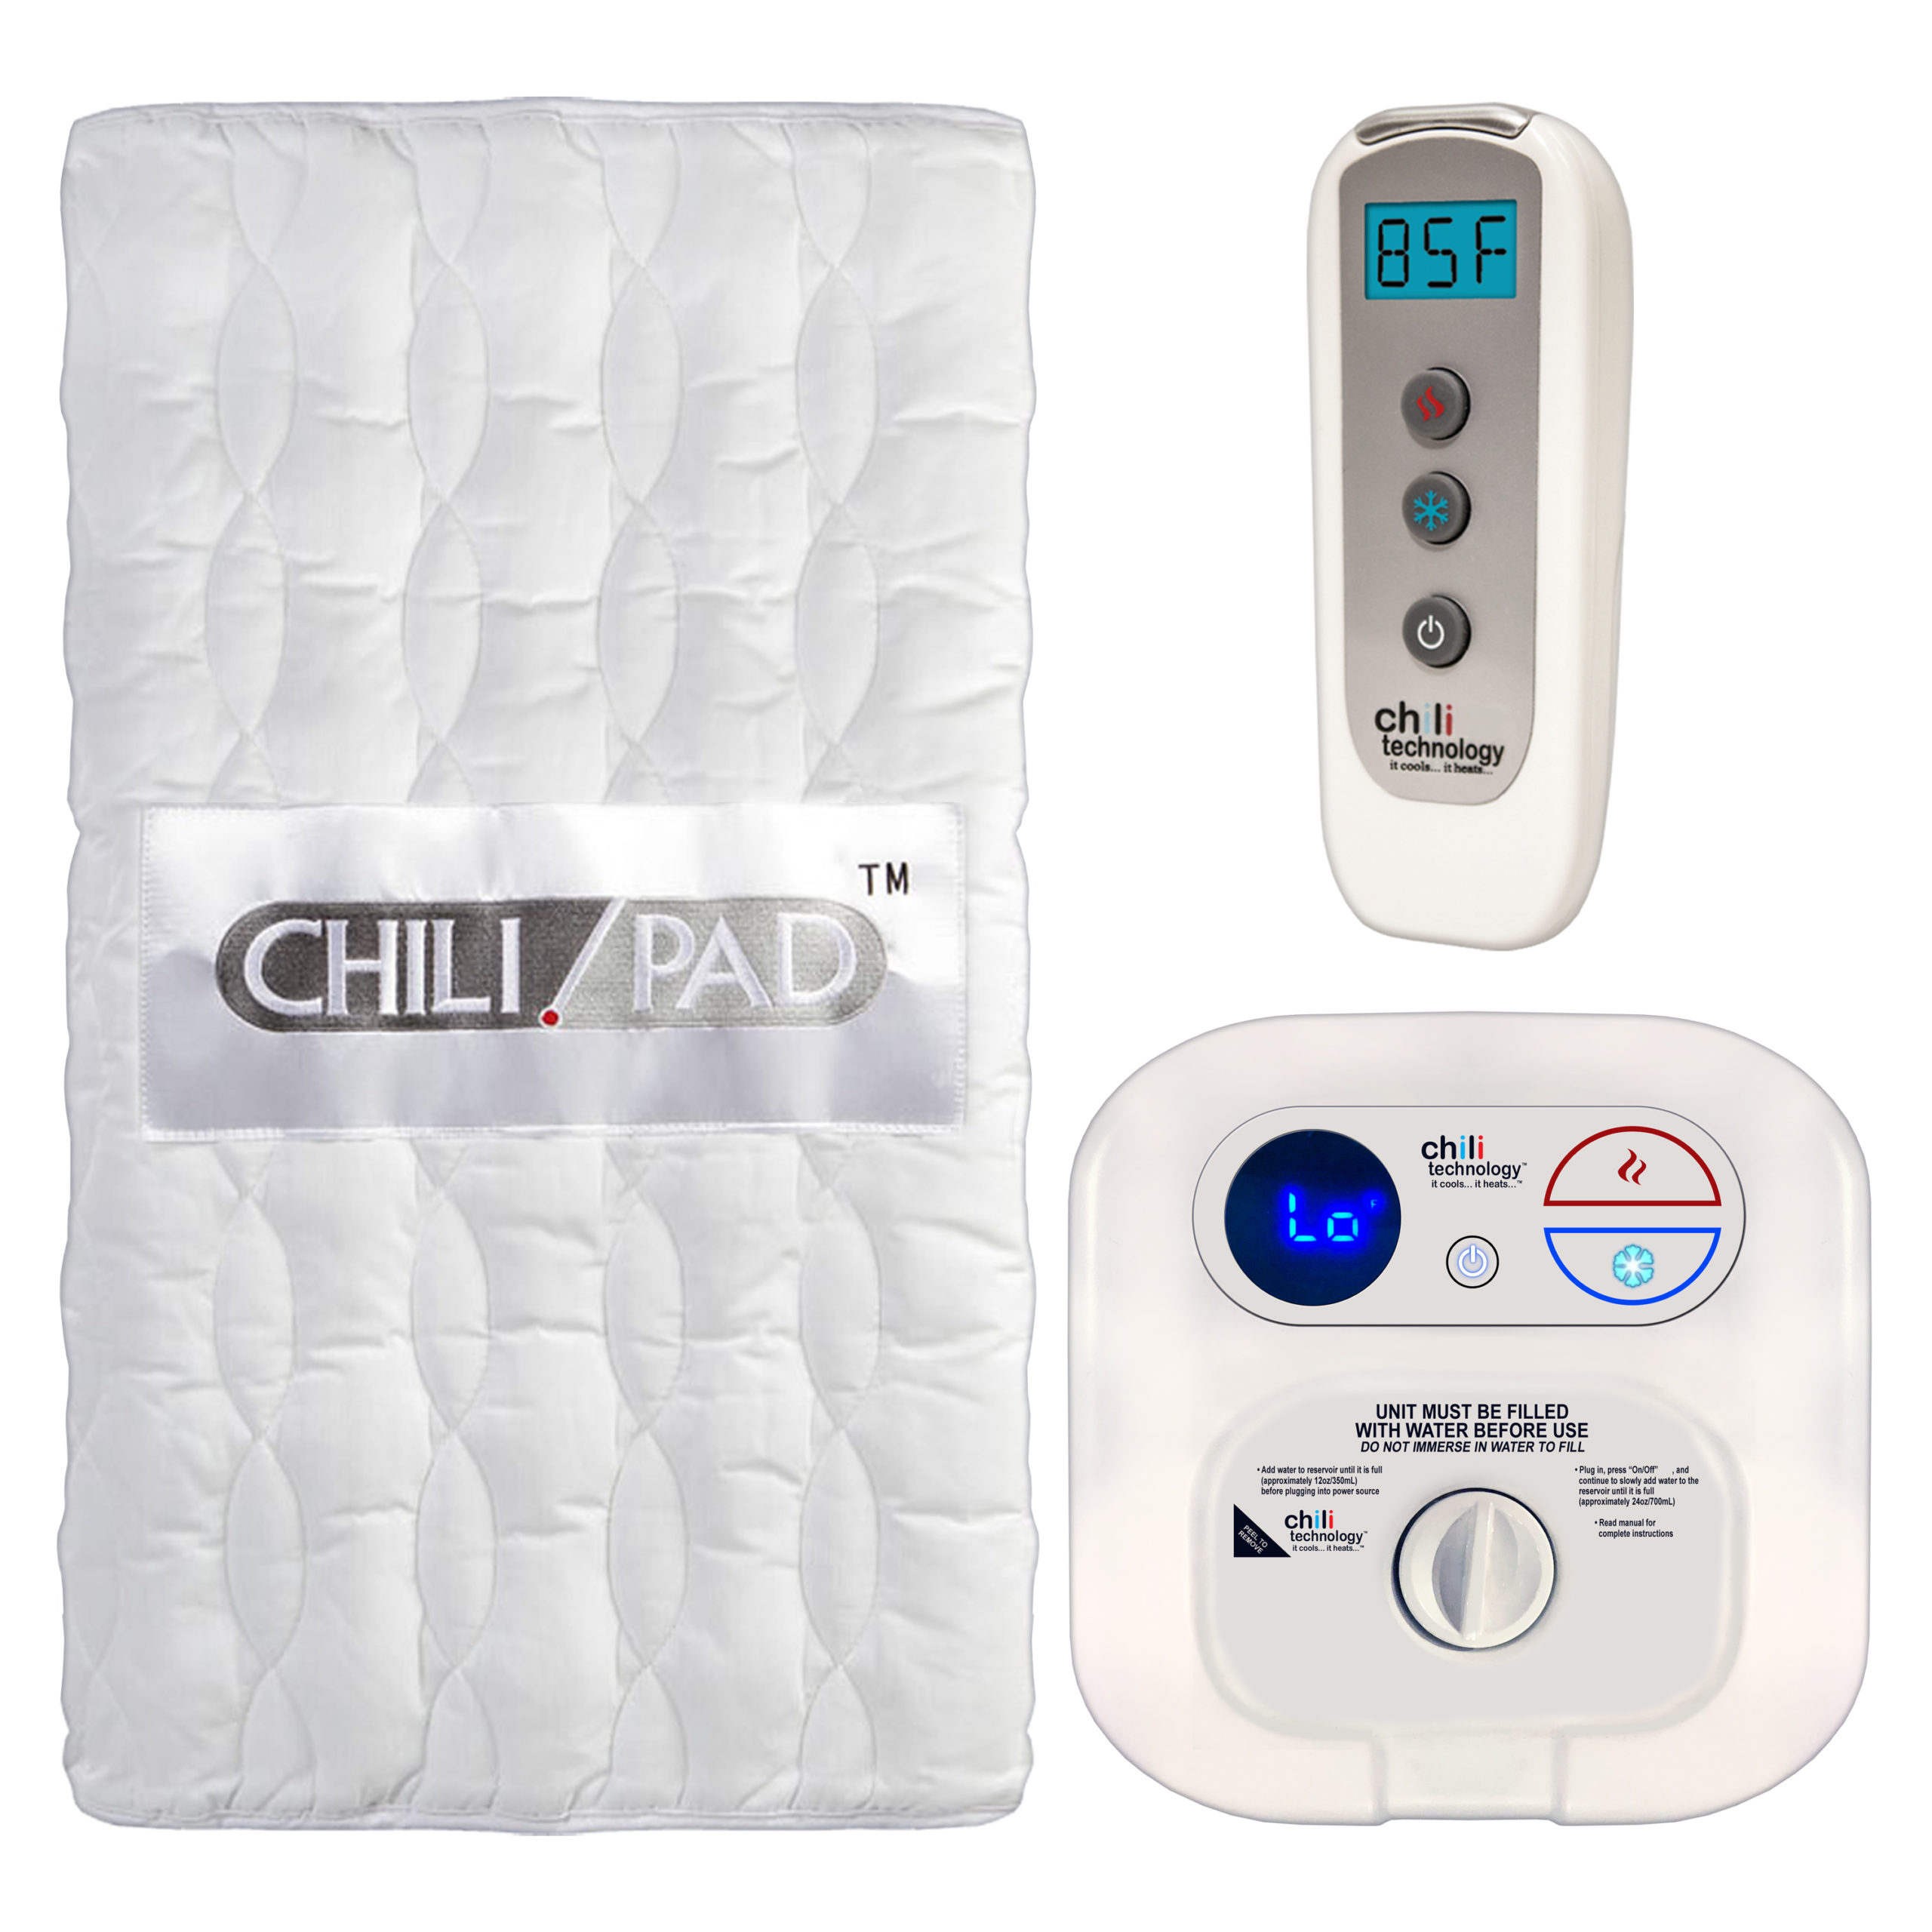 Can You Leave Electric Blanket on All Night - Chilipad|Temperature|Mattress|Cube|Sleep|Bed|Water|System|Pad|Ooler|Control|Unit|Night|Bedjet|Technology|Side|Air|Product|Review|Body|Time|Degrees|Noise|Price|Pod|Tubes|Heat|Device|Cooling|Room|King|App|Features|Size|Cover|Sleepers|Sheets|Energy|Warranty|Quality|Mattress Pad|Control Unit|Cube Sleep System|Sleep Pod|Distilled Water|Remote Control|Sleep System|Desired Temperature|Water Tank|Chilipad Cube|Chili Technology|Deep Sleep|Pro Cover|Ooler Sleep System|Hydrogen Peroxide|Cool Mesh|Sleep Temperature|Fitted Sheet|Pod Pro|Sleep Quality|Smartphone App|Sleep Systems|Chilipad Sleep System|New Mattress|Sleep Trial|Full Refund|Mattress Topper|Body Heat|Air Flow|Chilipad Review